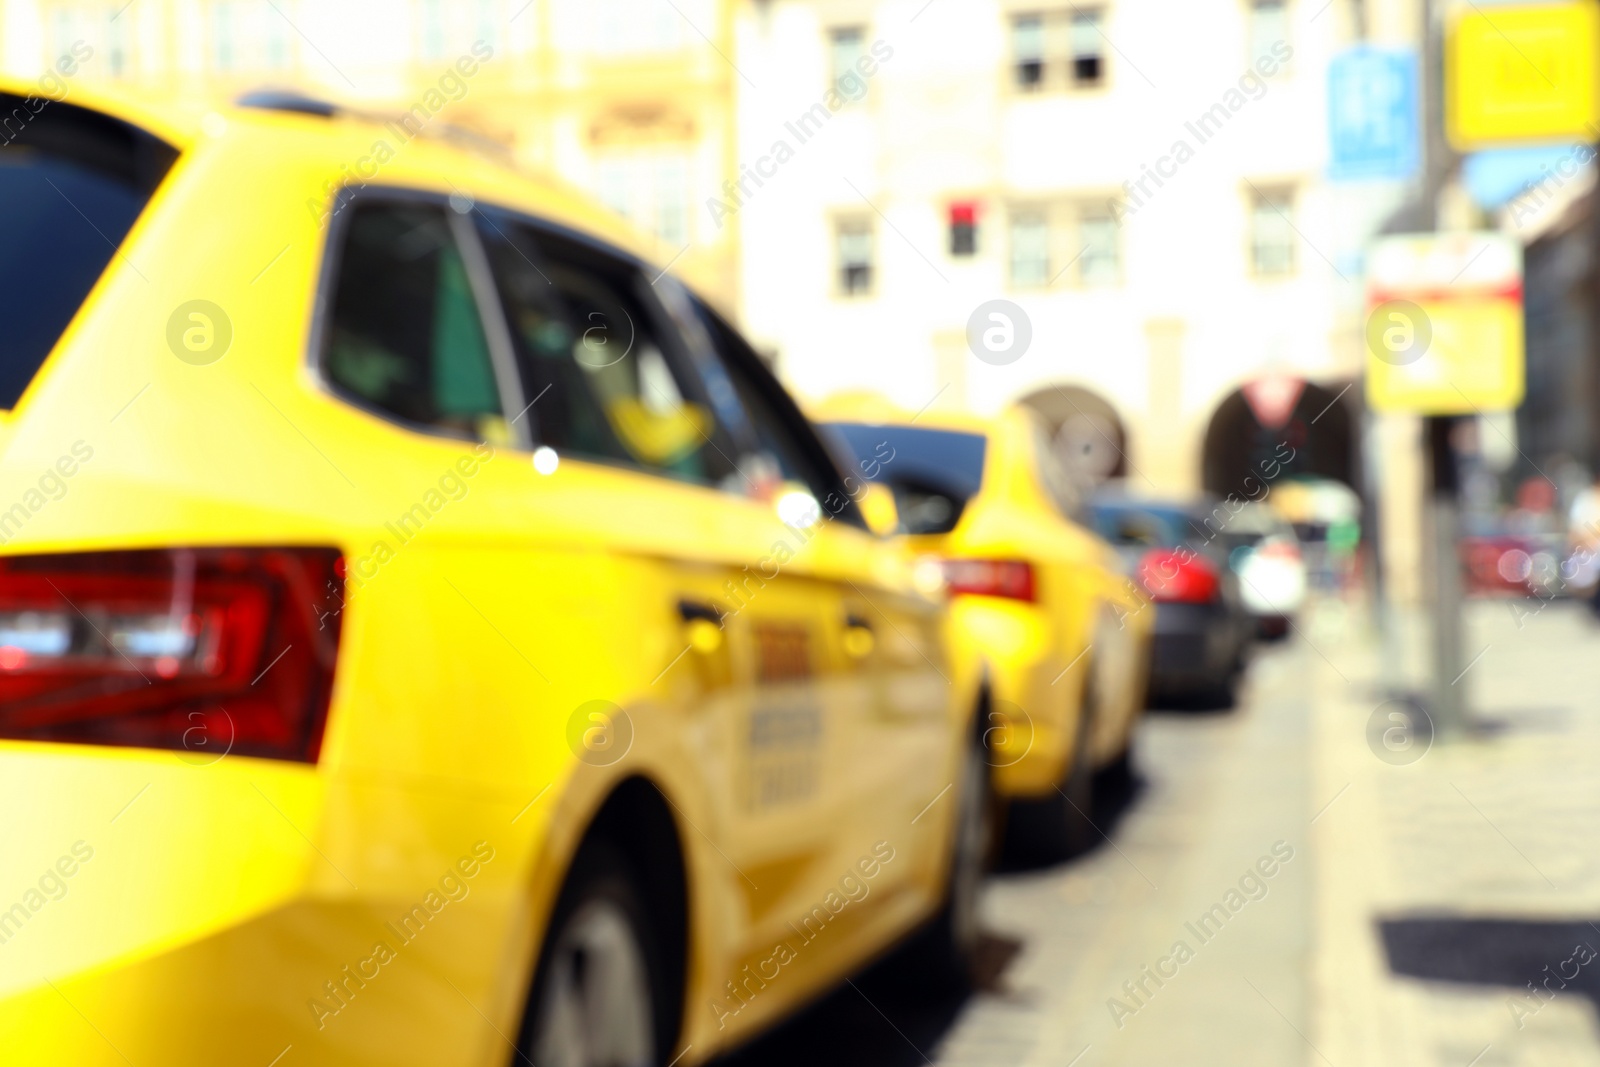 Photo of PRAGUE, CZECH REPUBLIC - APRIL 25, 2019: Blurred view of taxi parked on city street